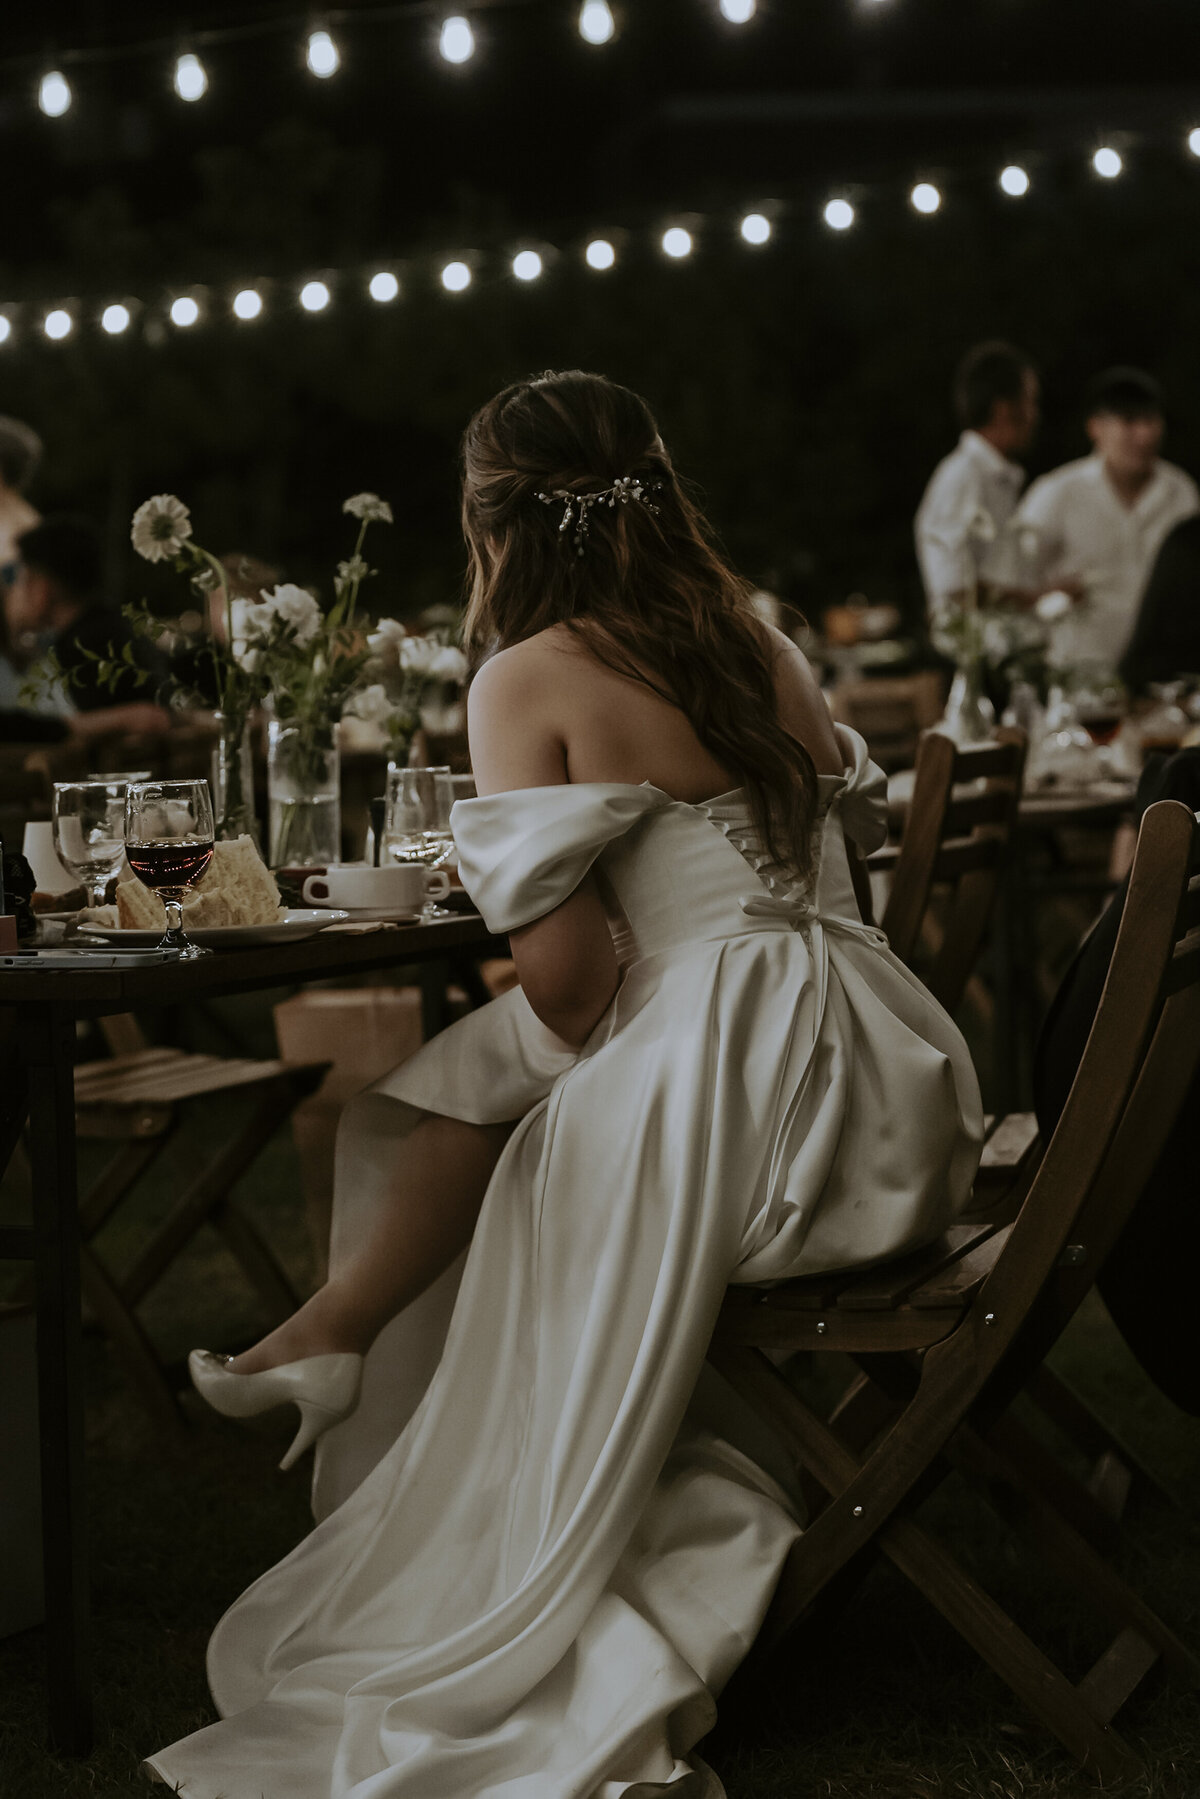 the bride sitting down wearing her wedding dress and while heels